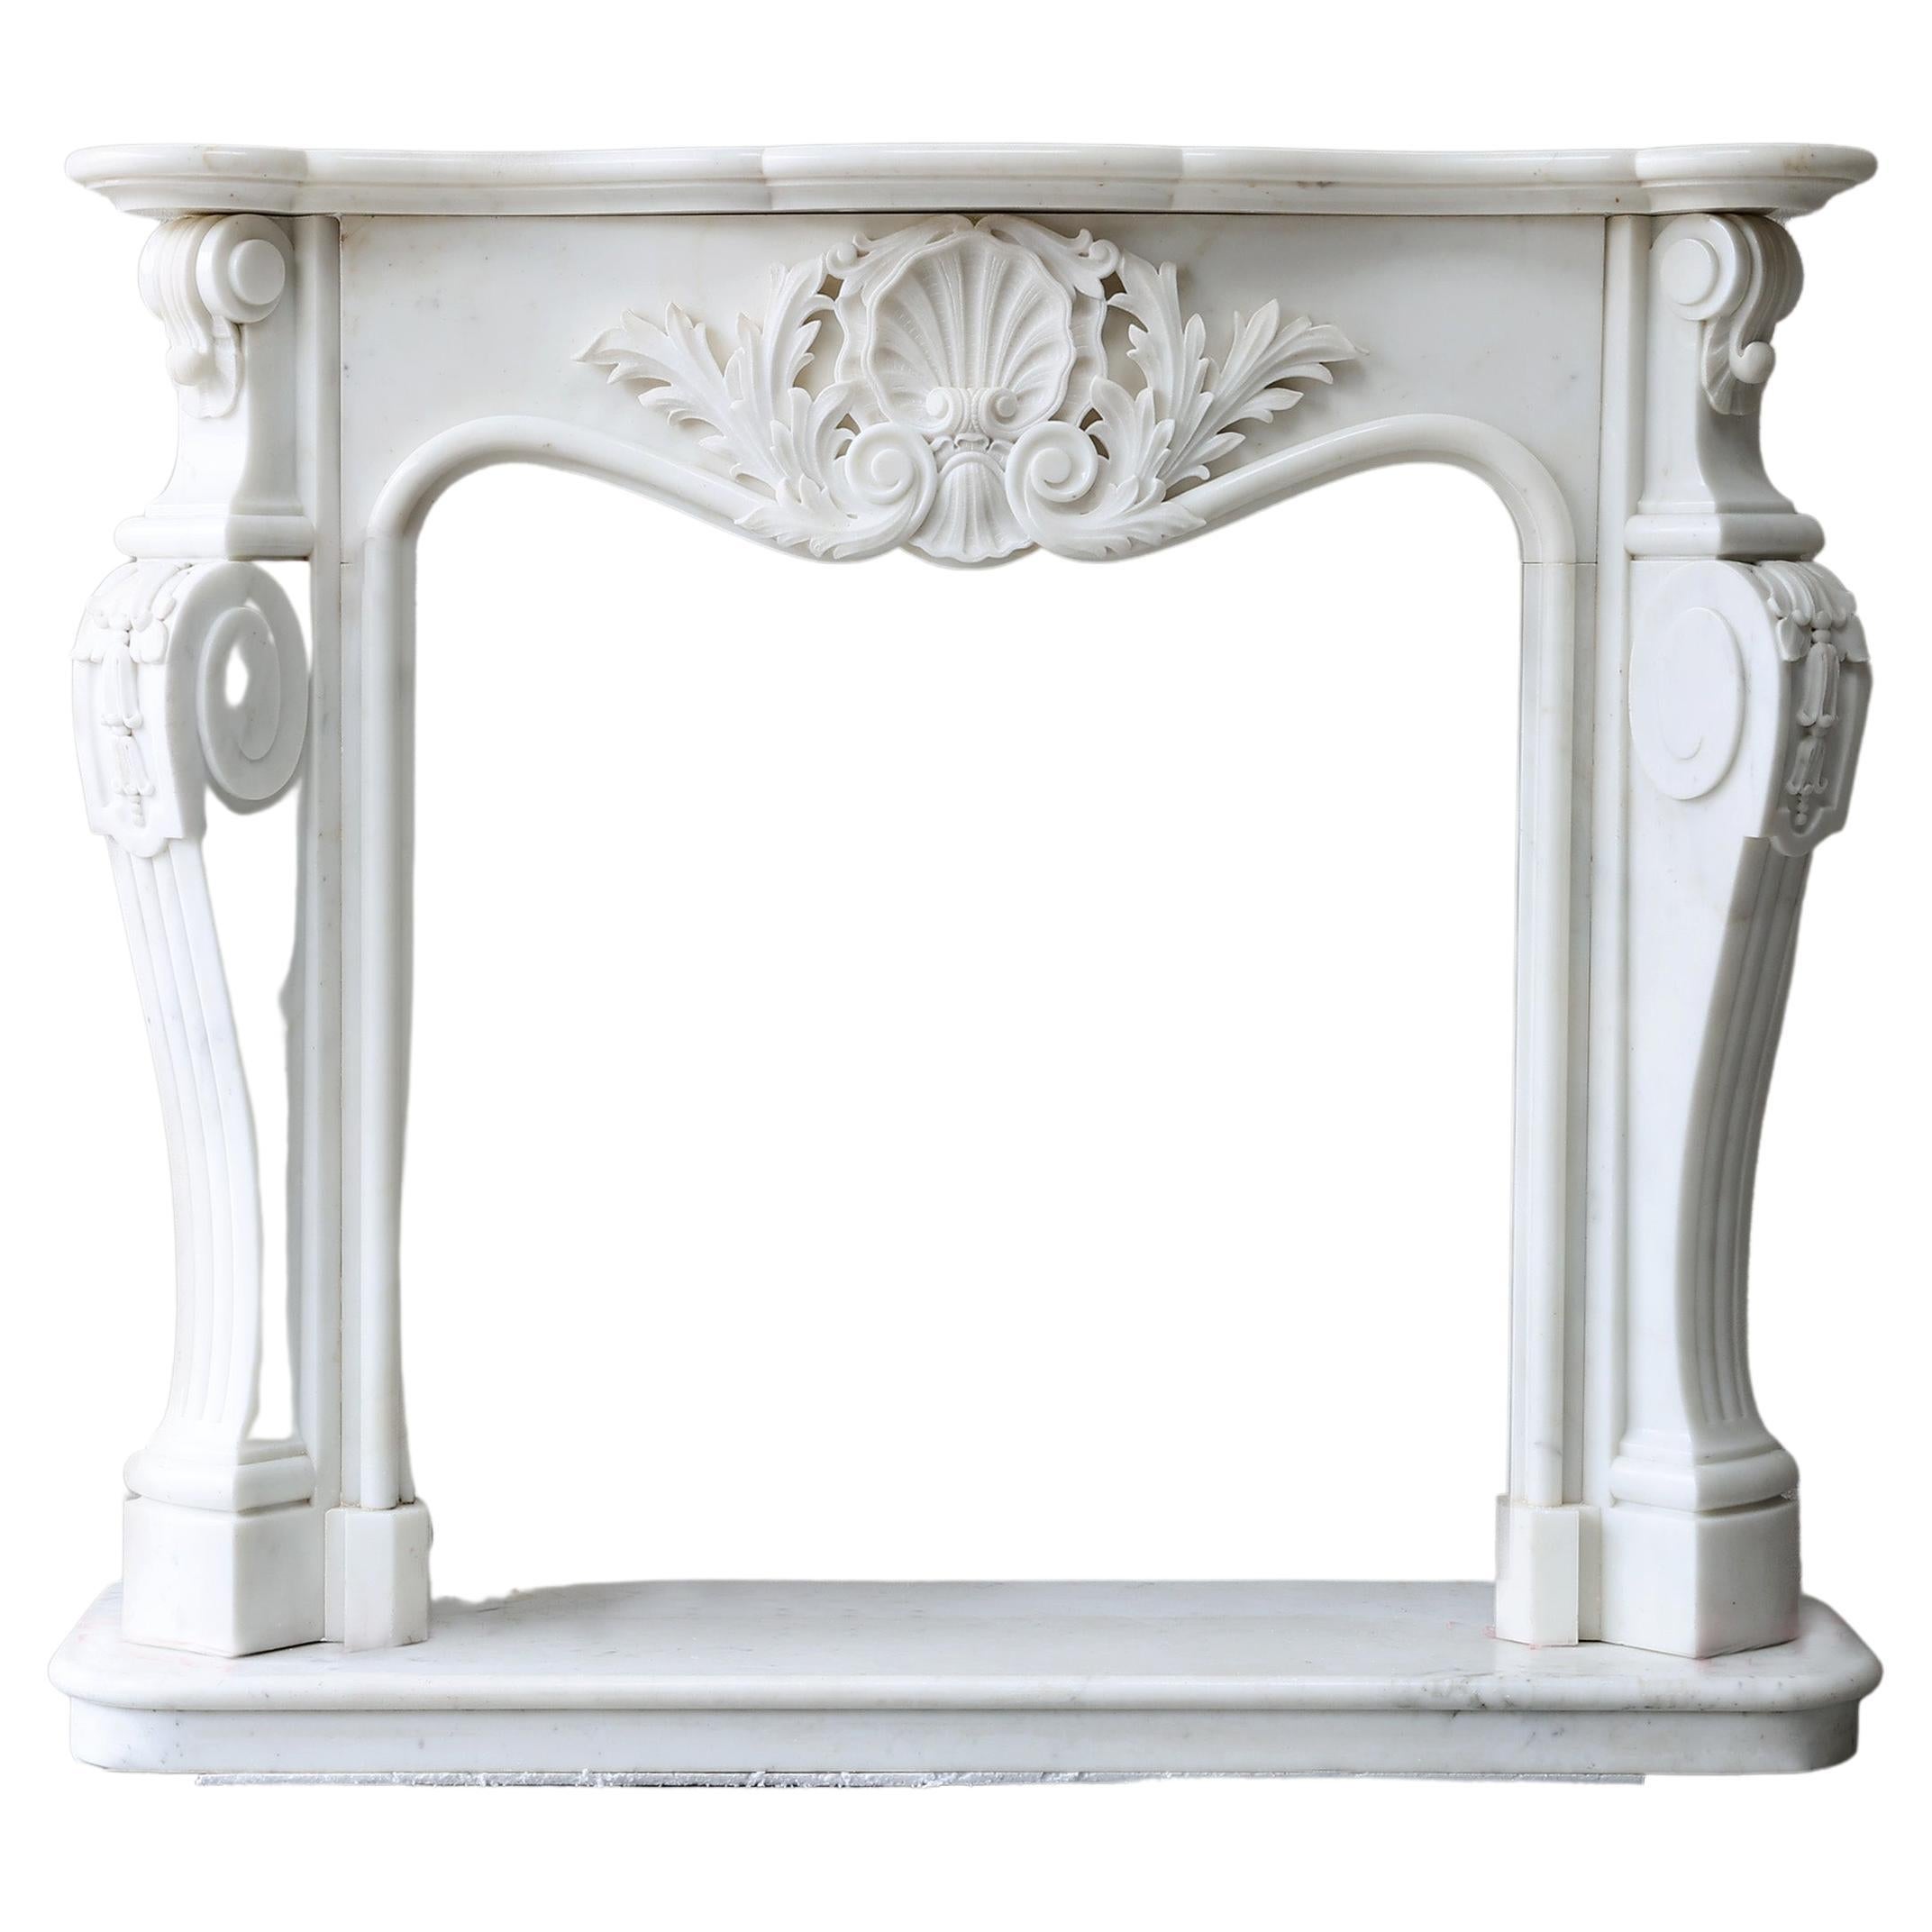 Carrara Marble Fireplace in the Style of Louis XV from the 20th Century